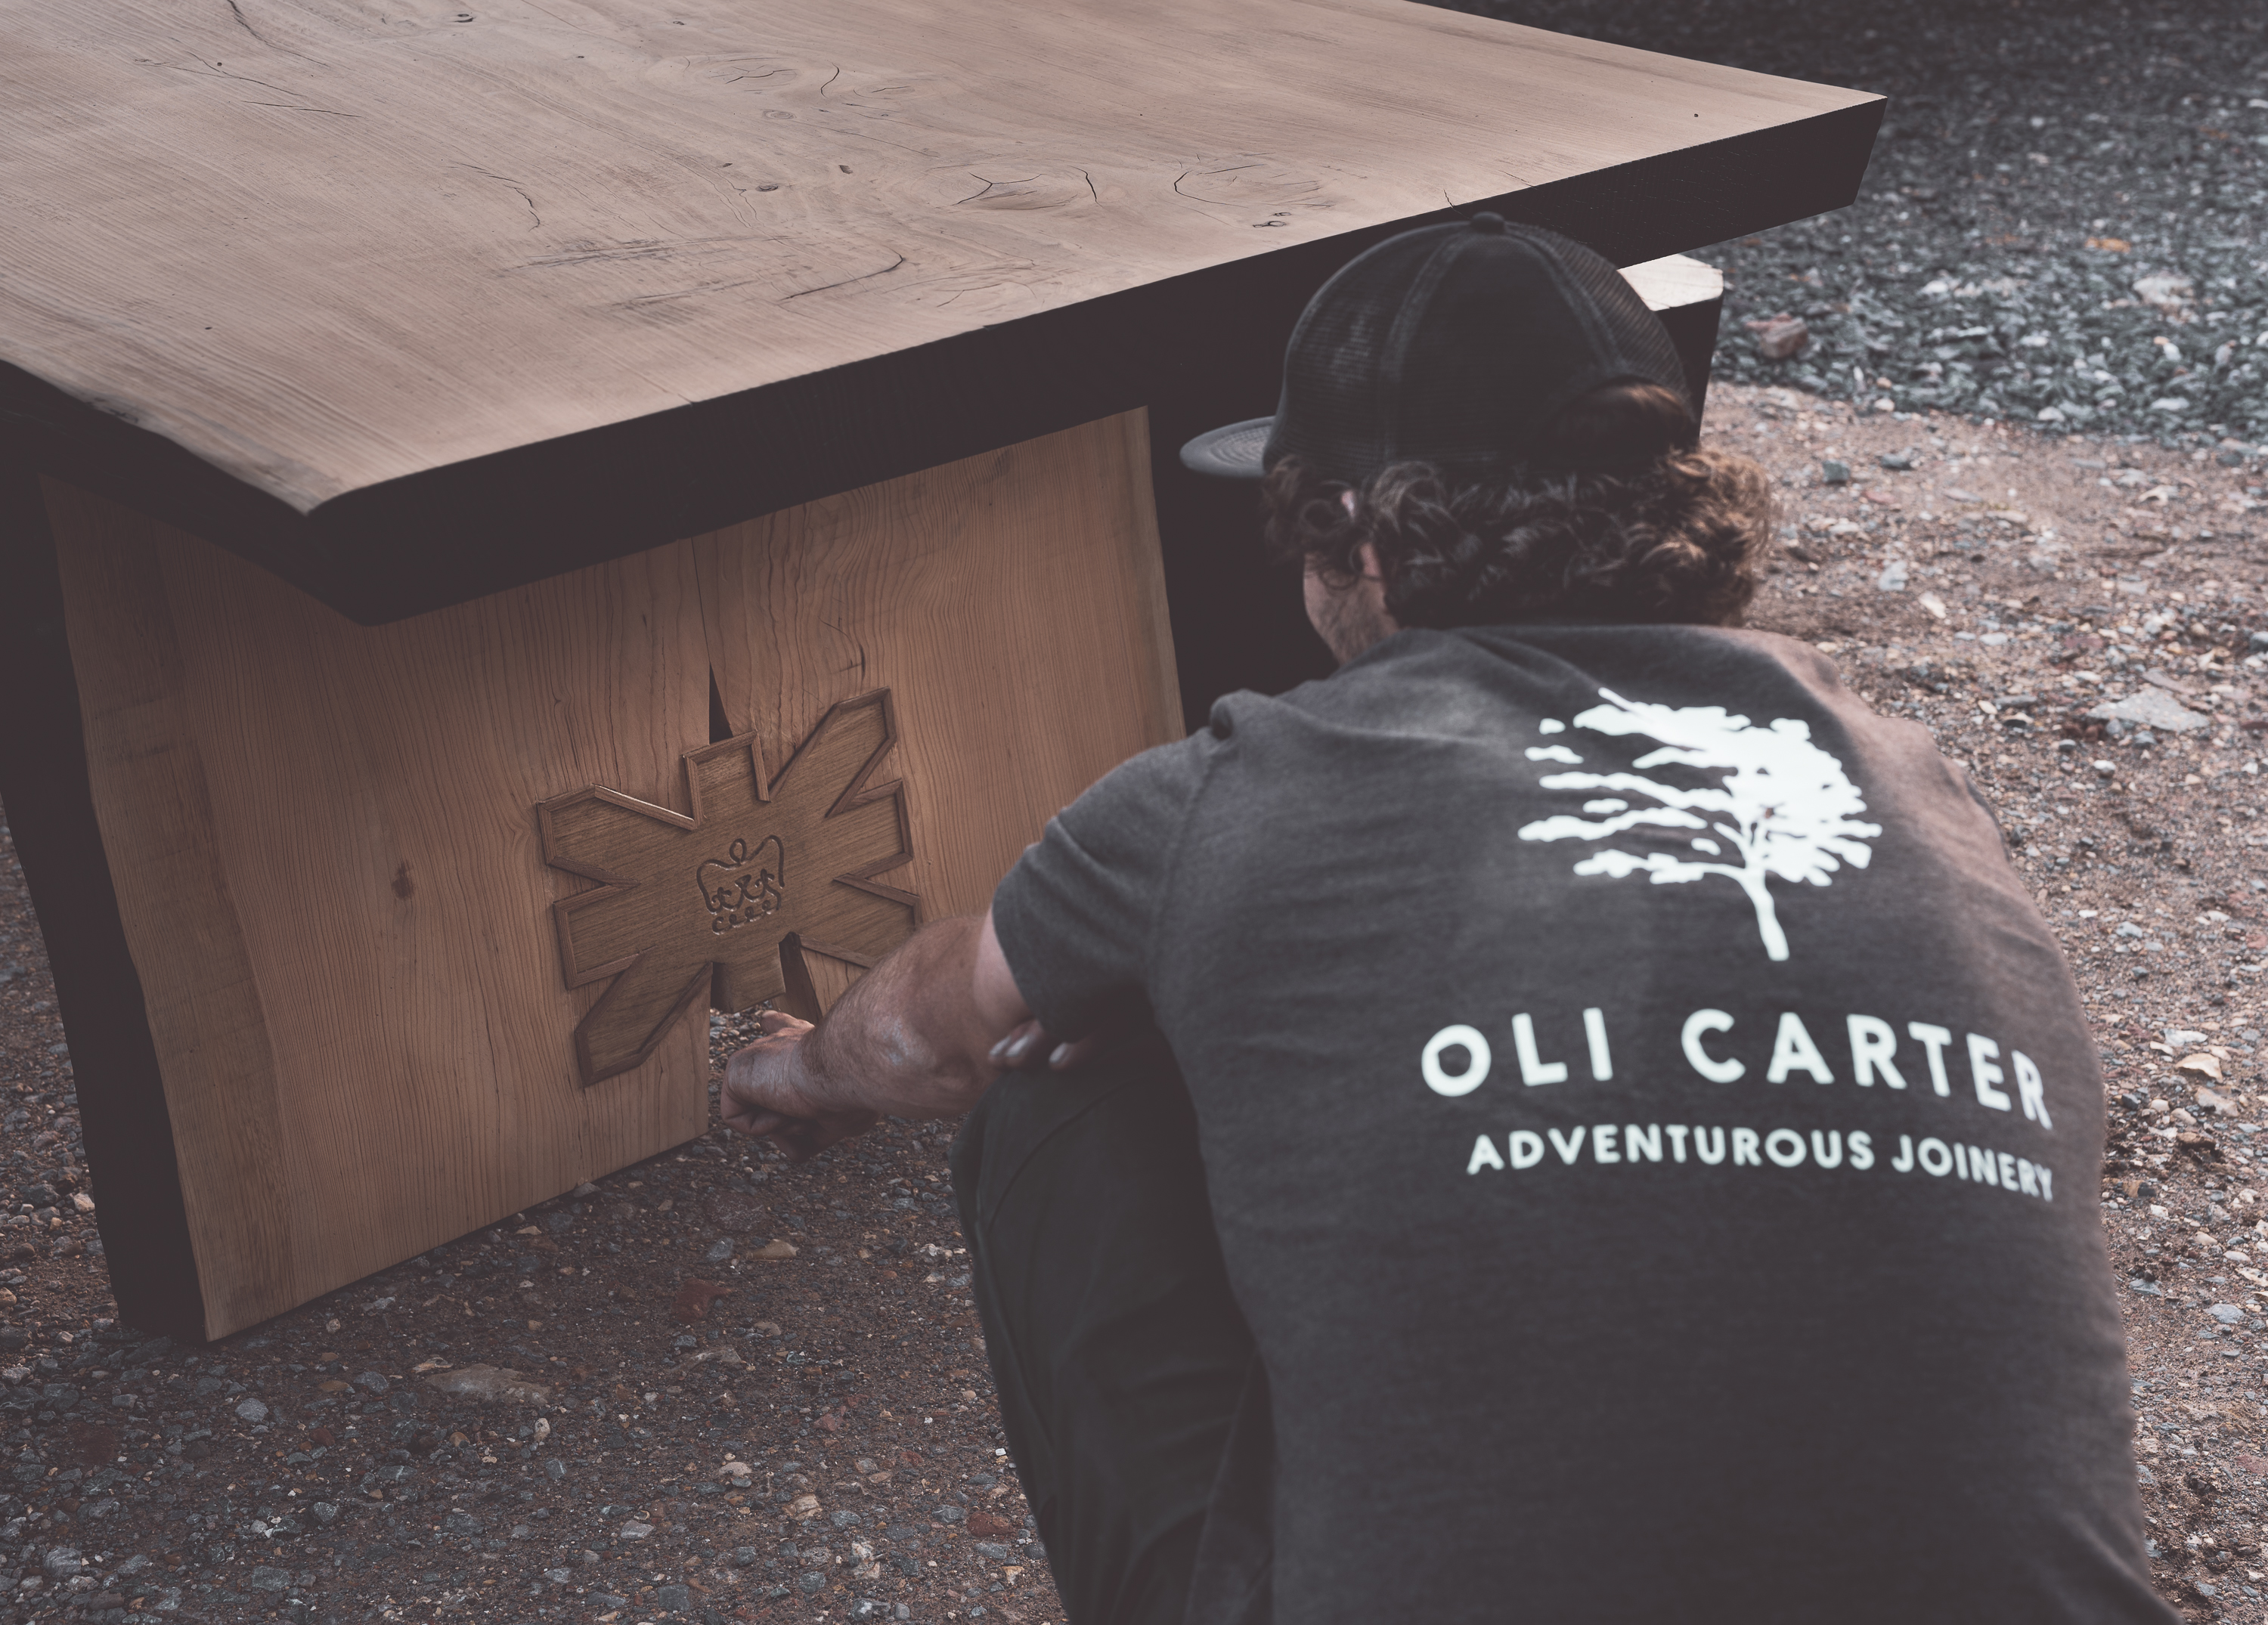 Oli Carter Adventurous Joinery with his Table, Bodelia for Chelsea Flower Show